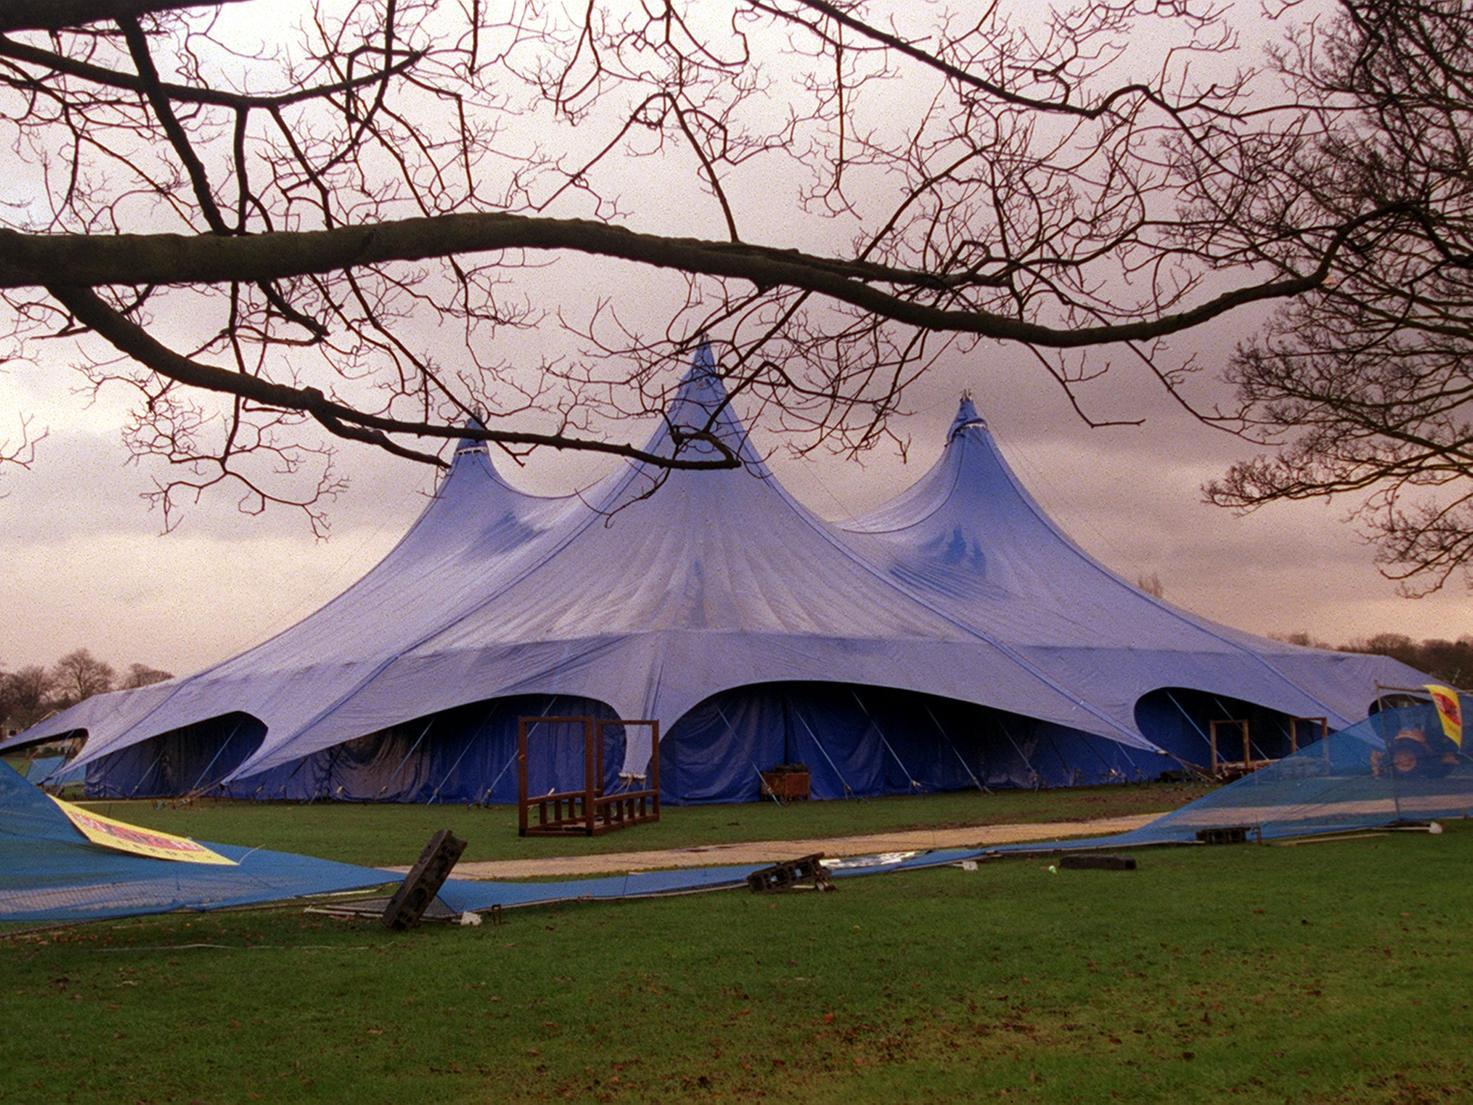 The 'big top' for the Millennium night celebrations at Rounday Park.